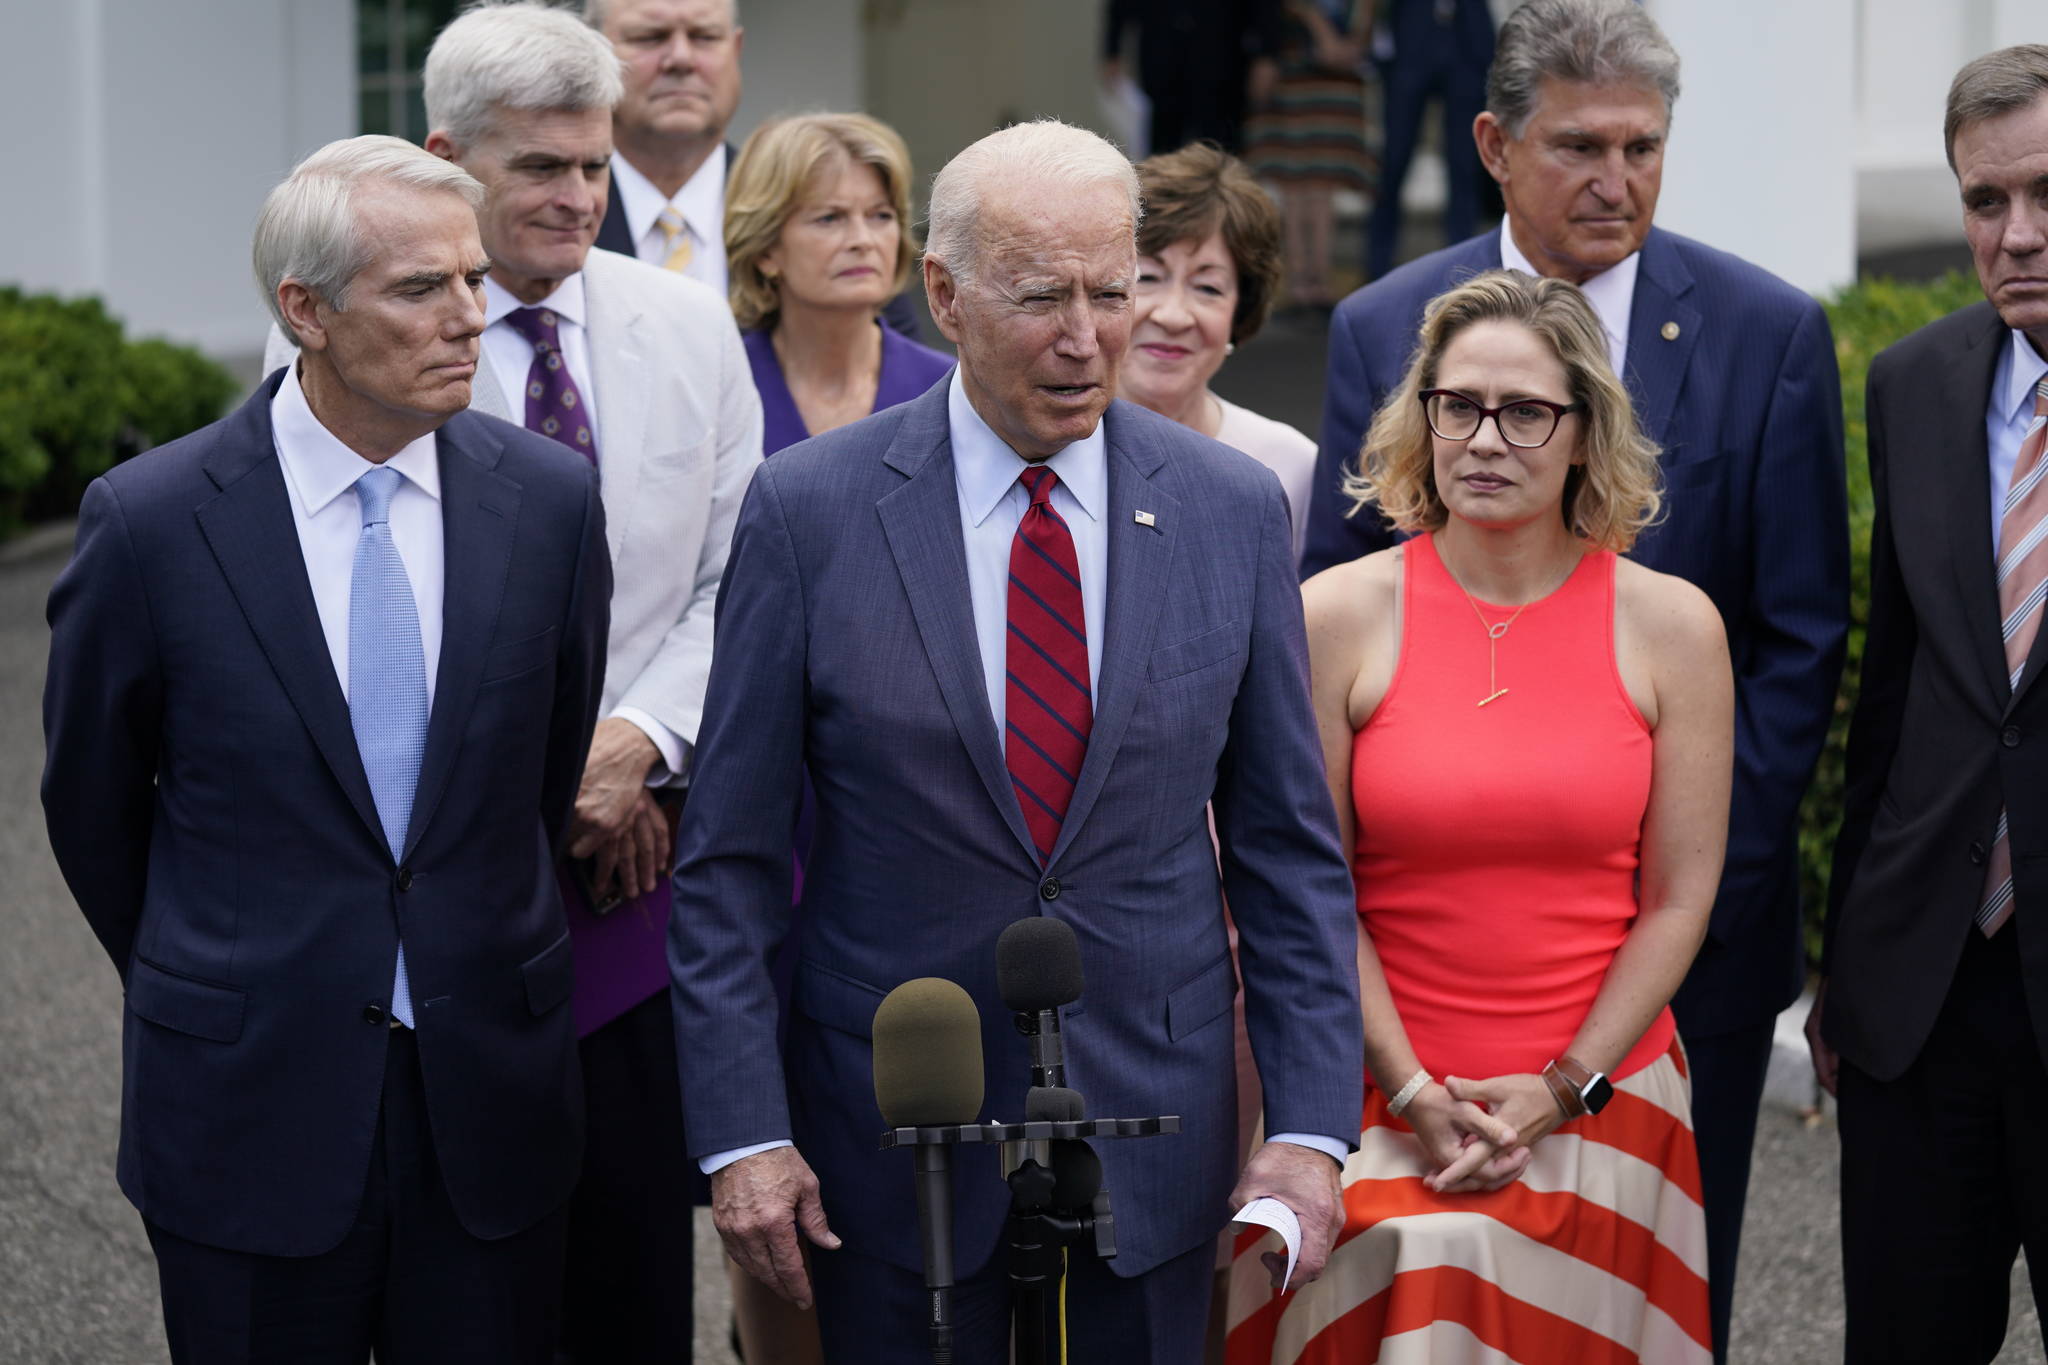 President Joe Biden, with a bipartisan group of Senators, including Alaska’s Lisa Murkowski, speaks Thursday June 24, 2021, outside the White House in Washington. Biden invited members of the group of 21 Republican and Democratic senators to discuss the infrastructure plan. (AP Photo / Evan Vucci)